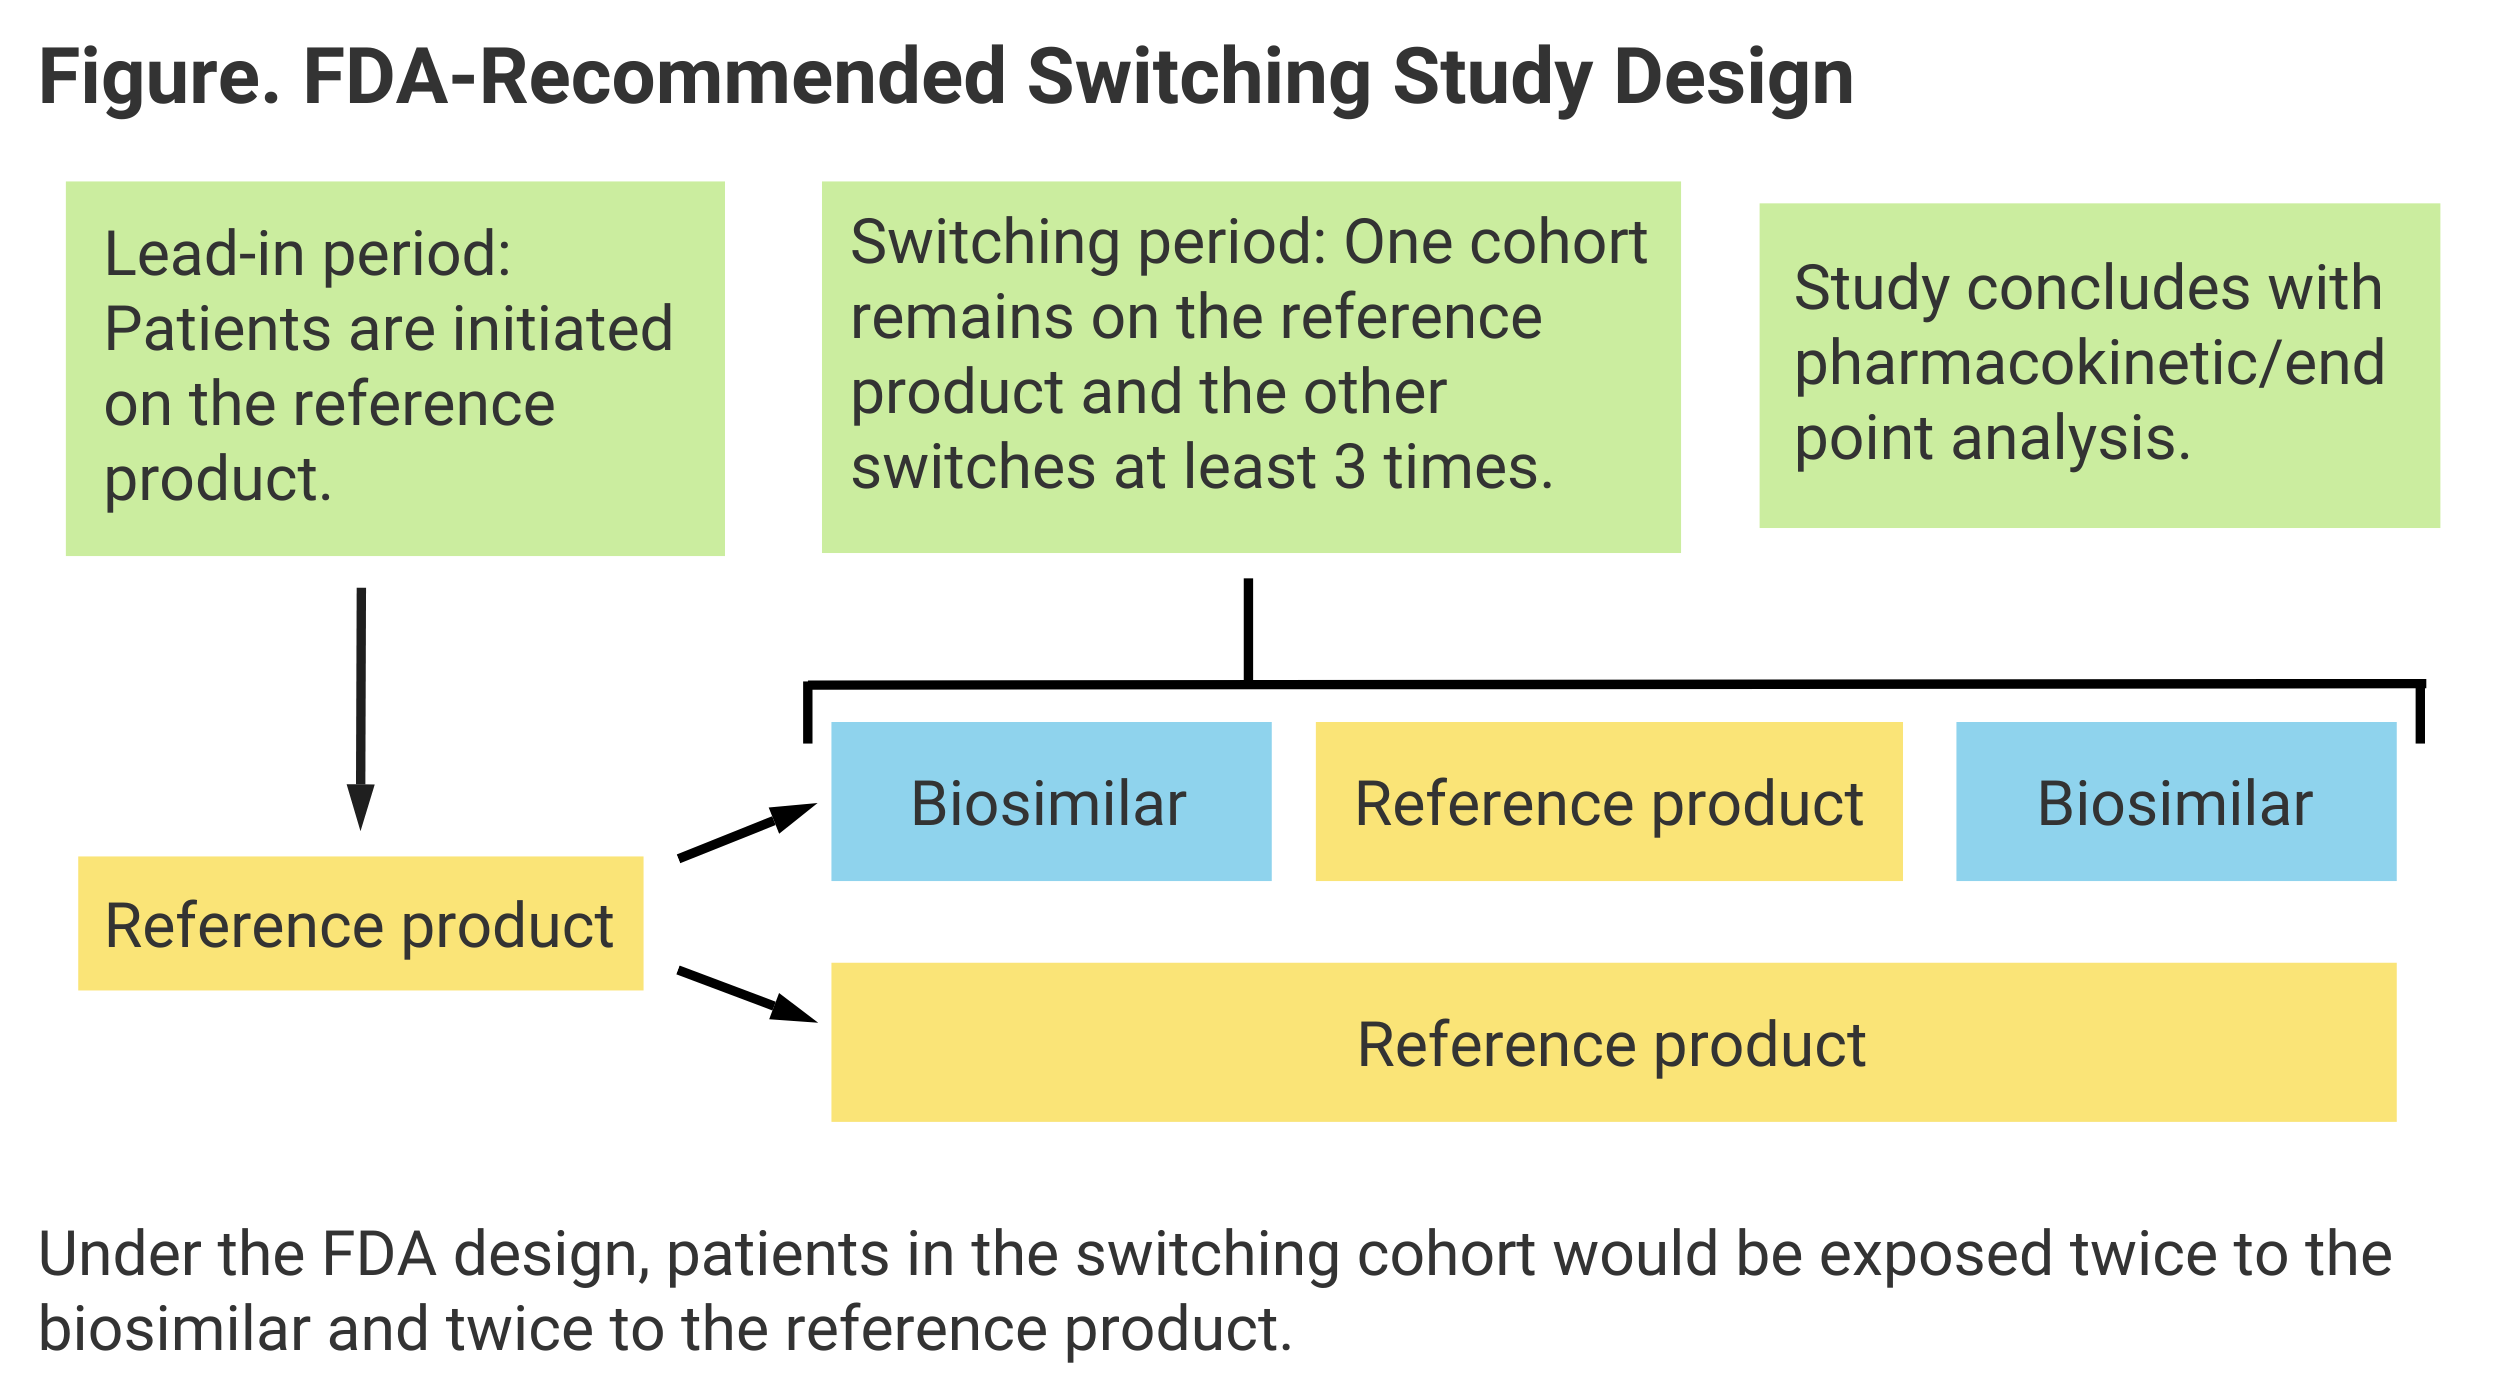 FDA-Recommended Switching Study Design